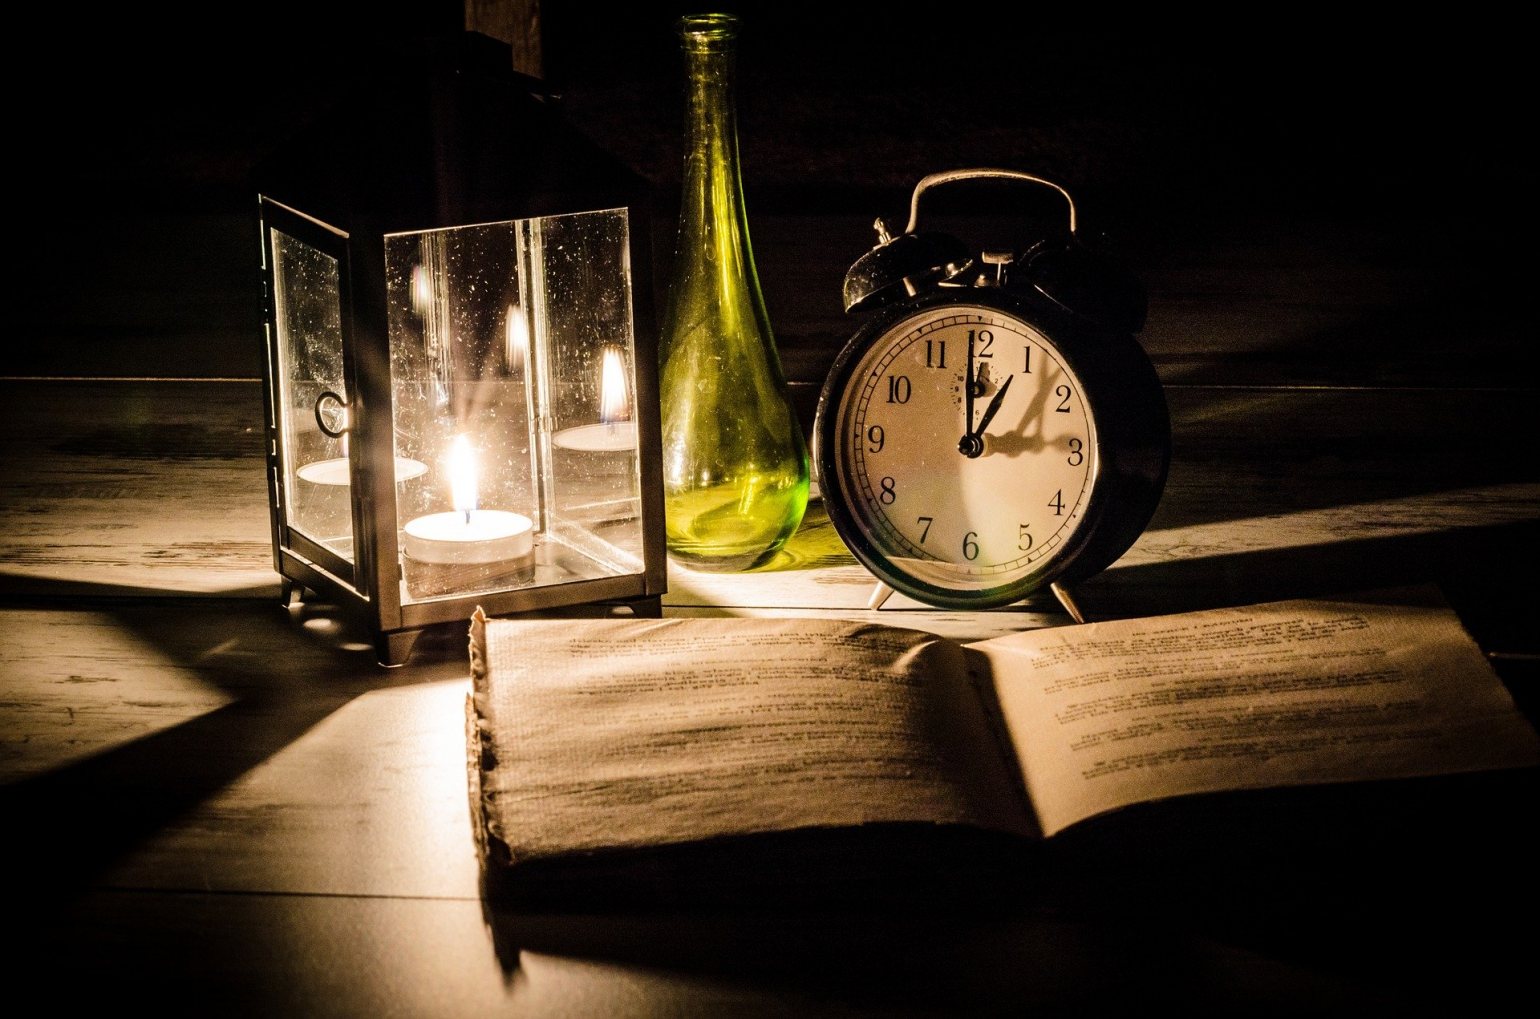 Circadian Rhythm - Reading Book and alarm clock by candle lamplight